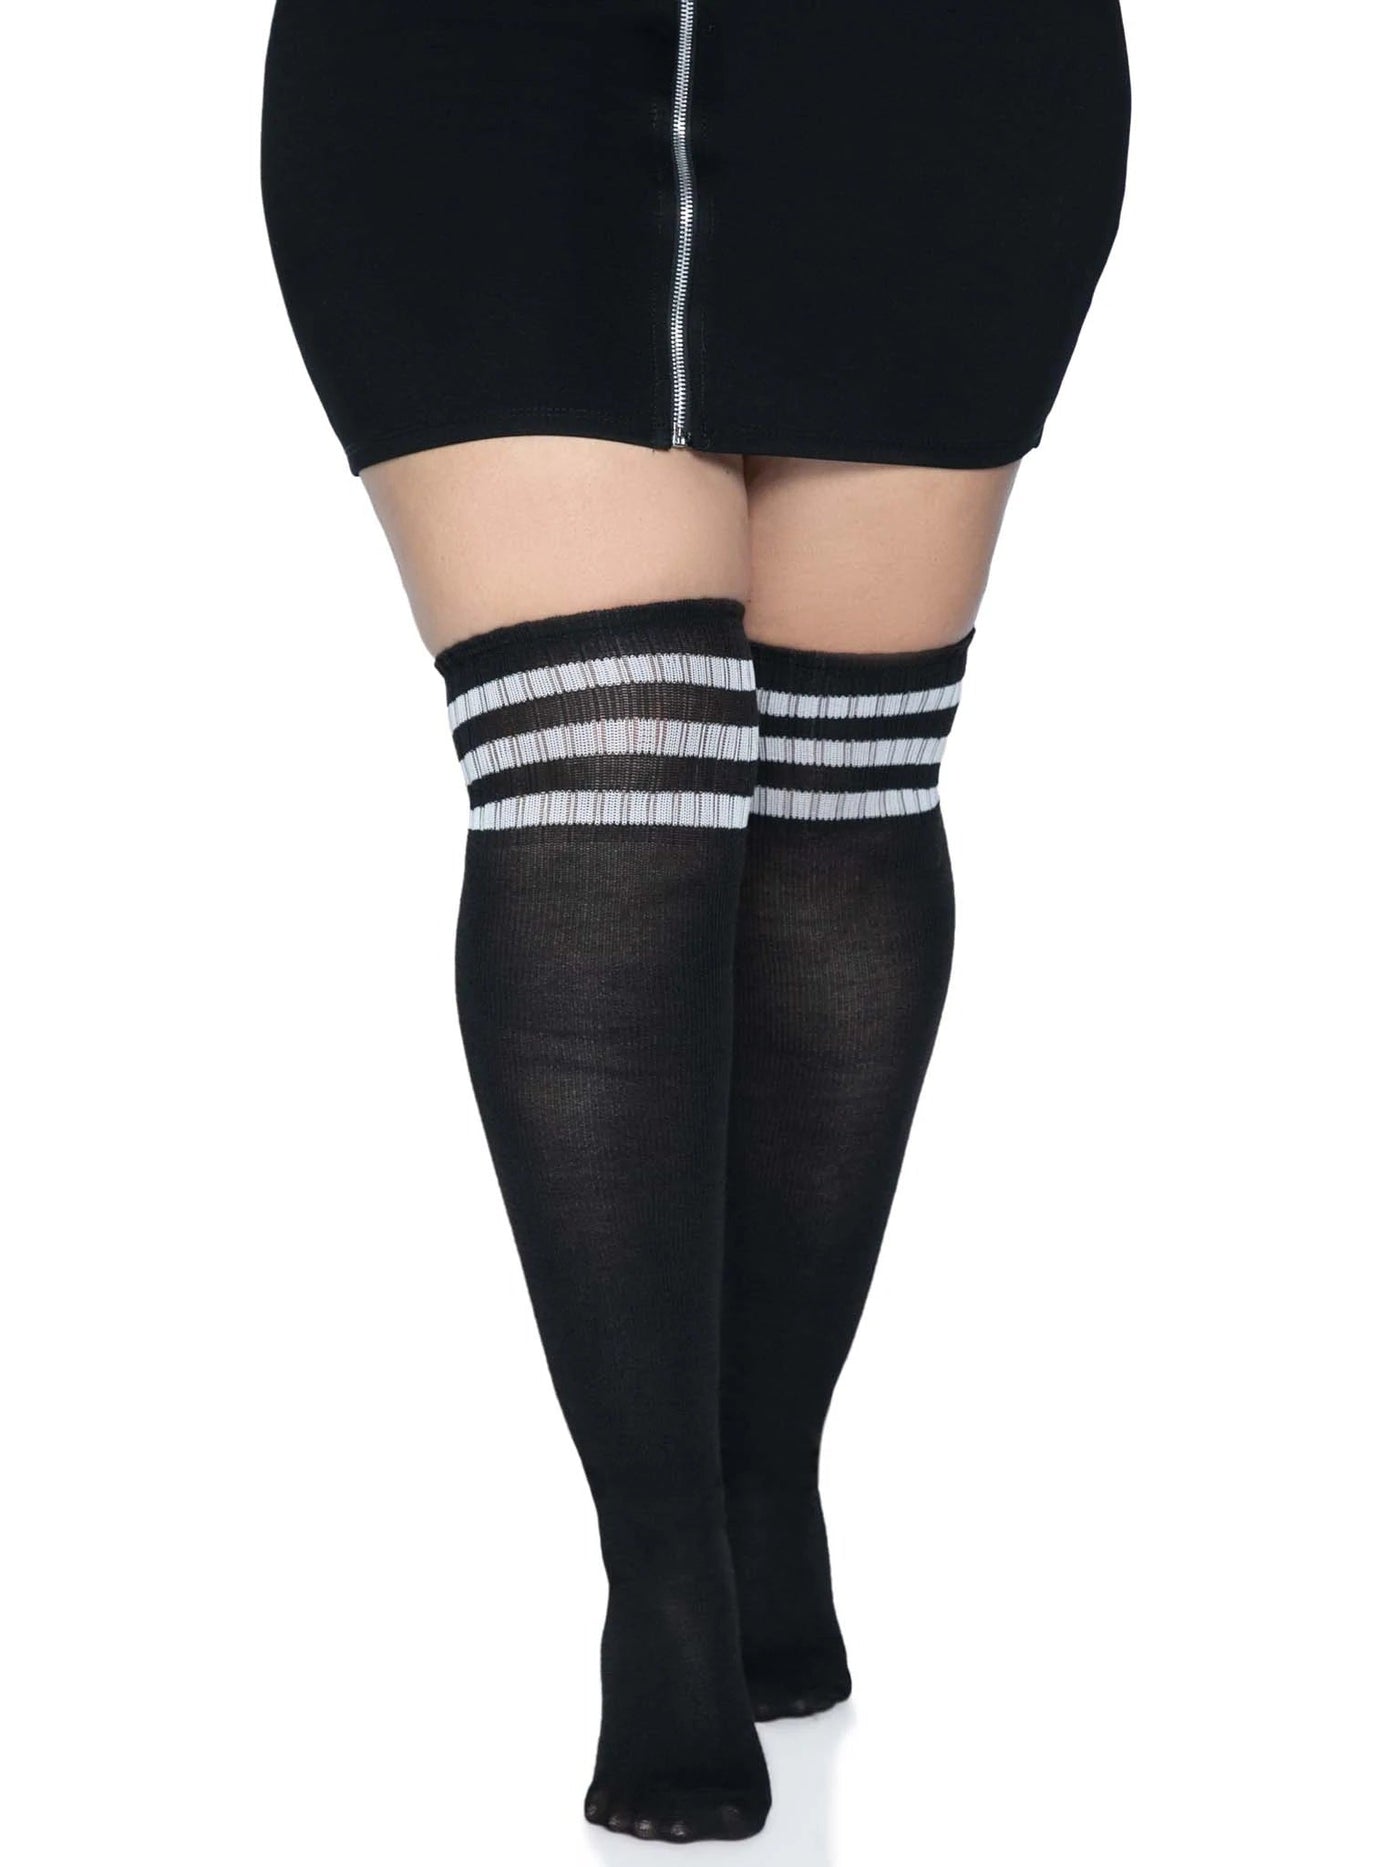 Over the Knee Athletic Socks